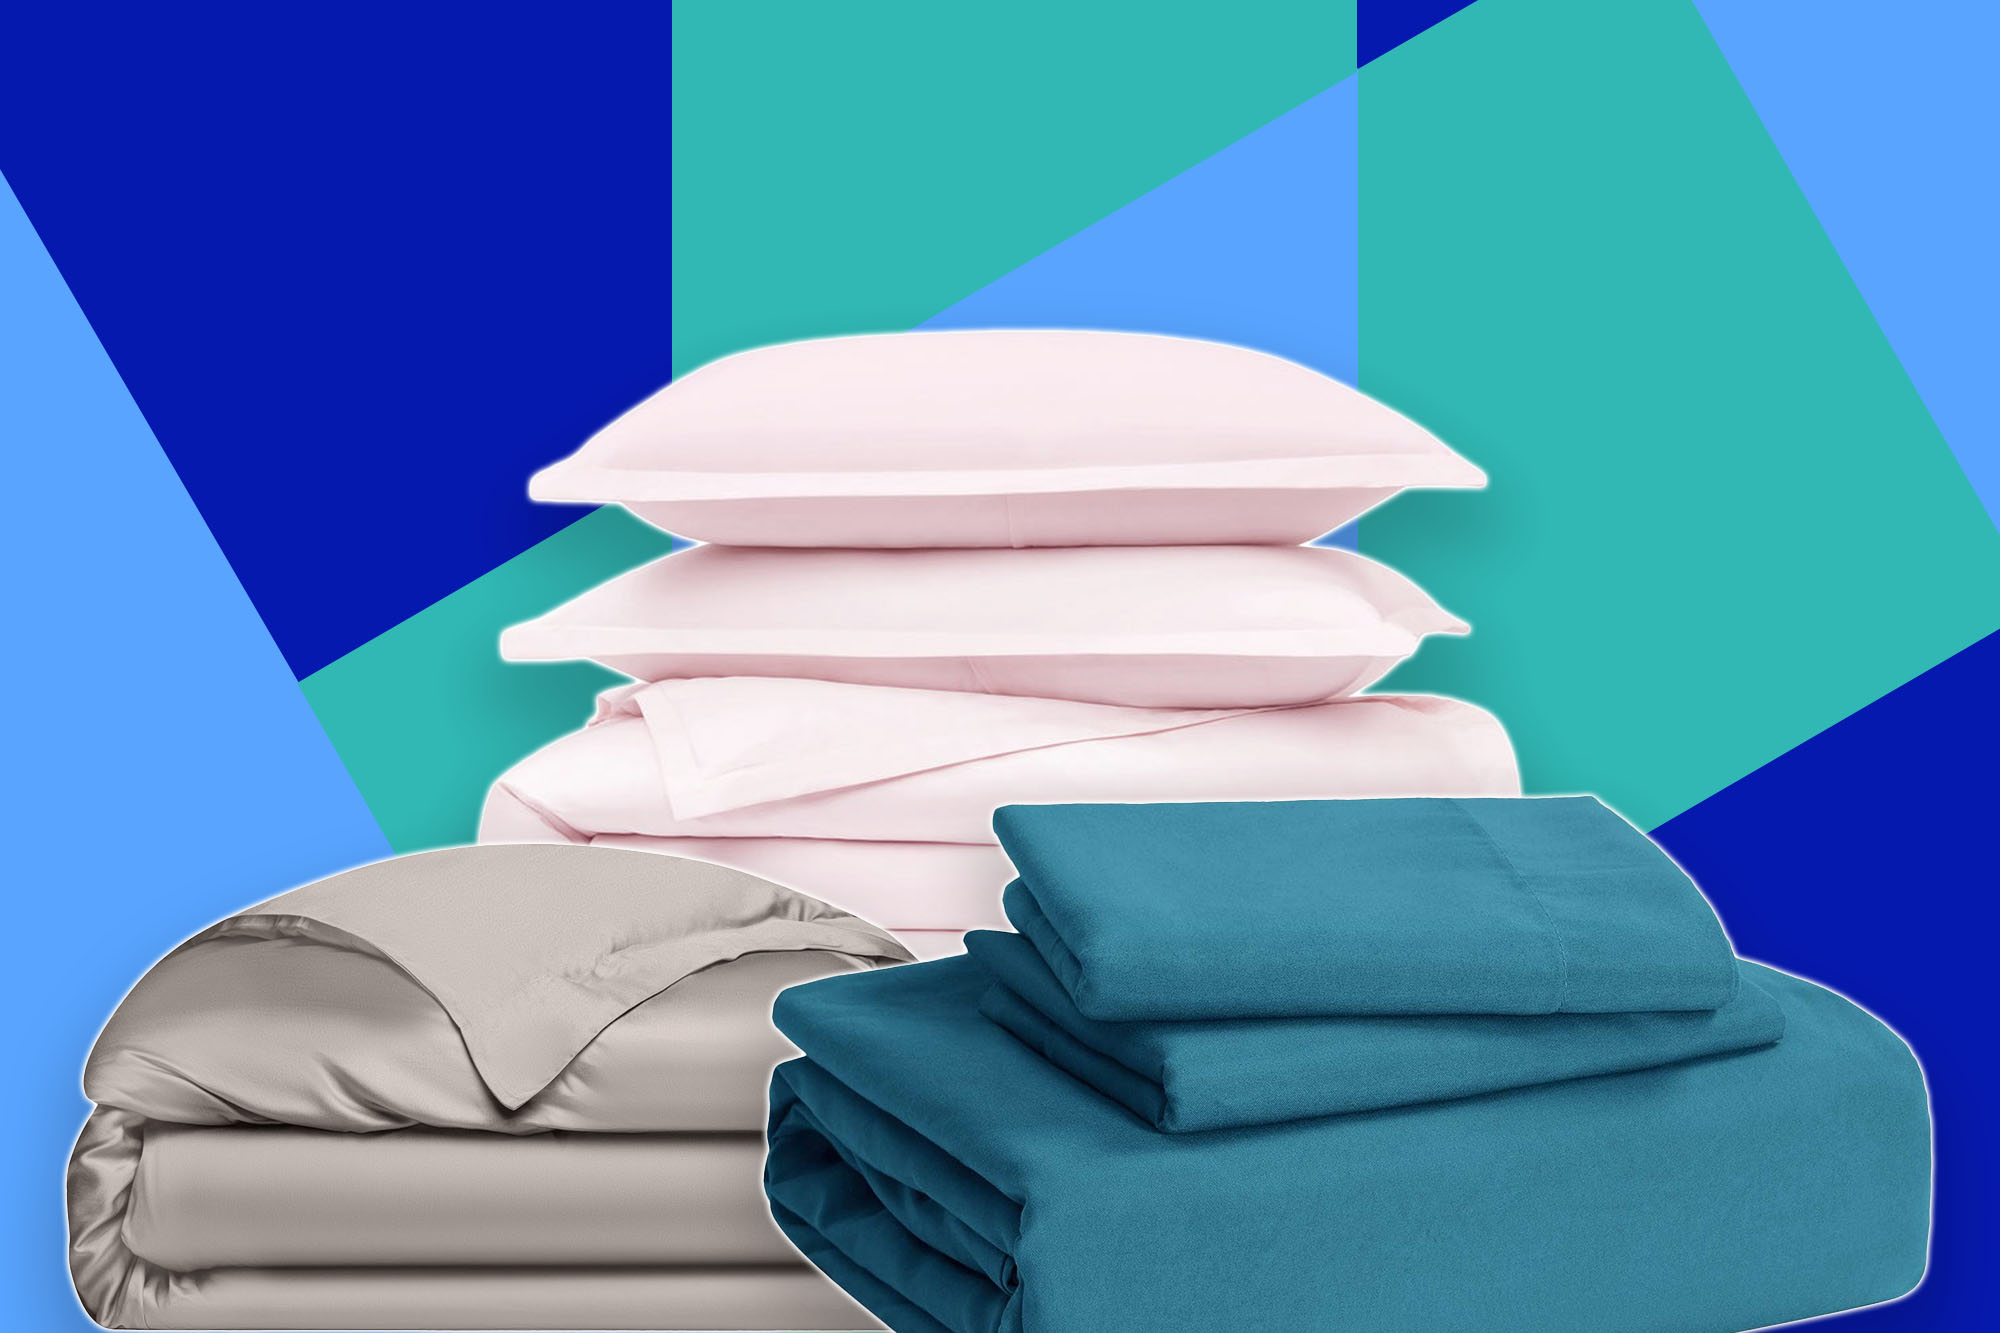 Stack of bedding and pillows